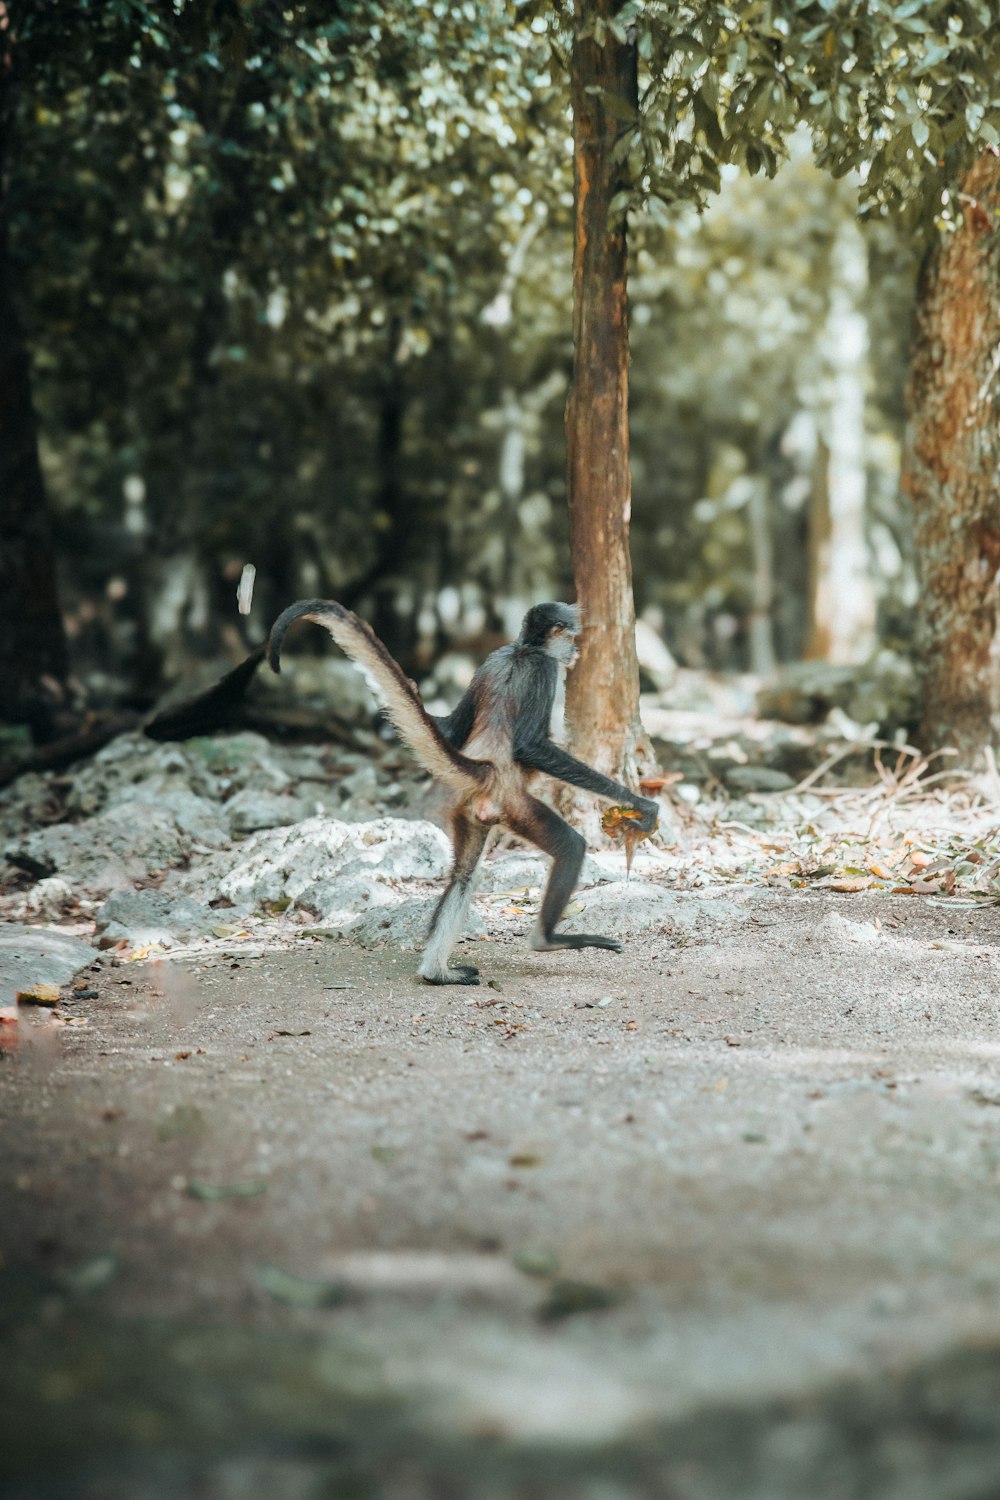 a monkey running through a forest with trees in the background